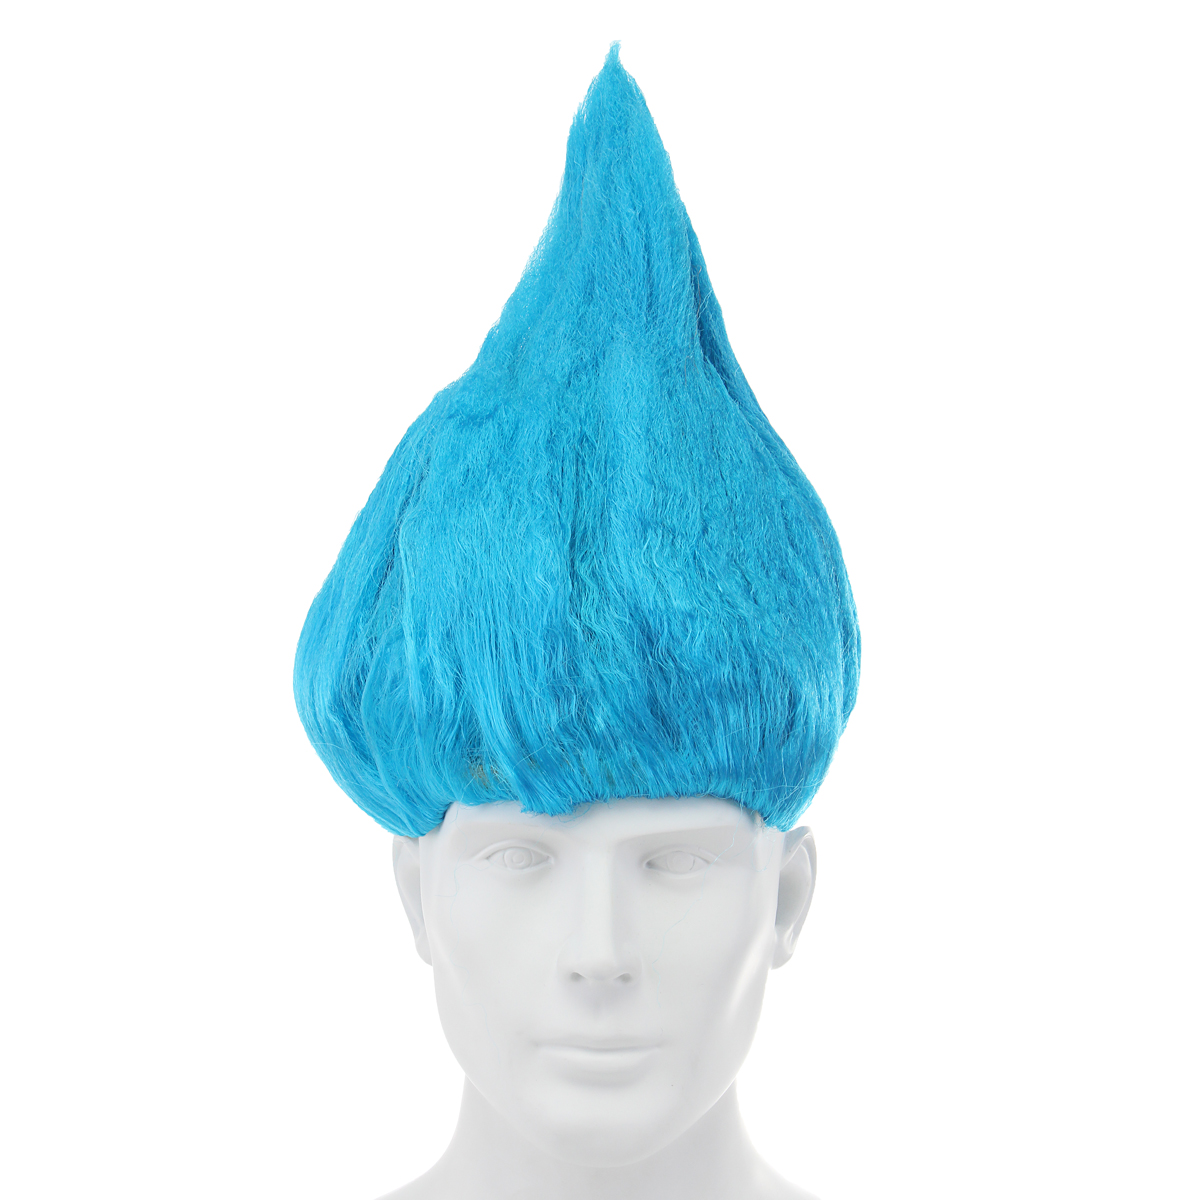 Elf-Flames-Shaped-Hair-Wig-Halloween-Colorful-Party-Cosplay-Masquerade-Dressing-Wigs-1187869-5